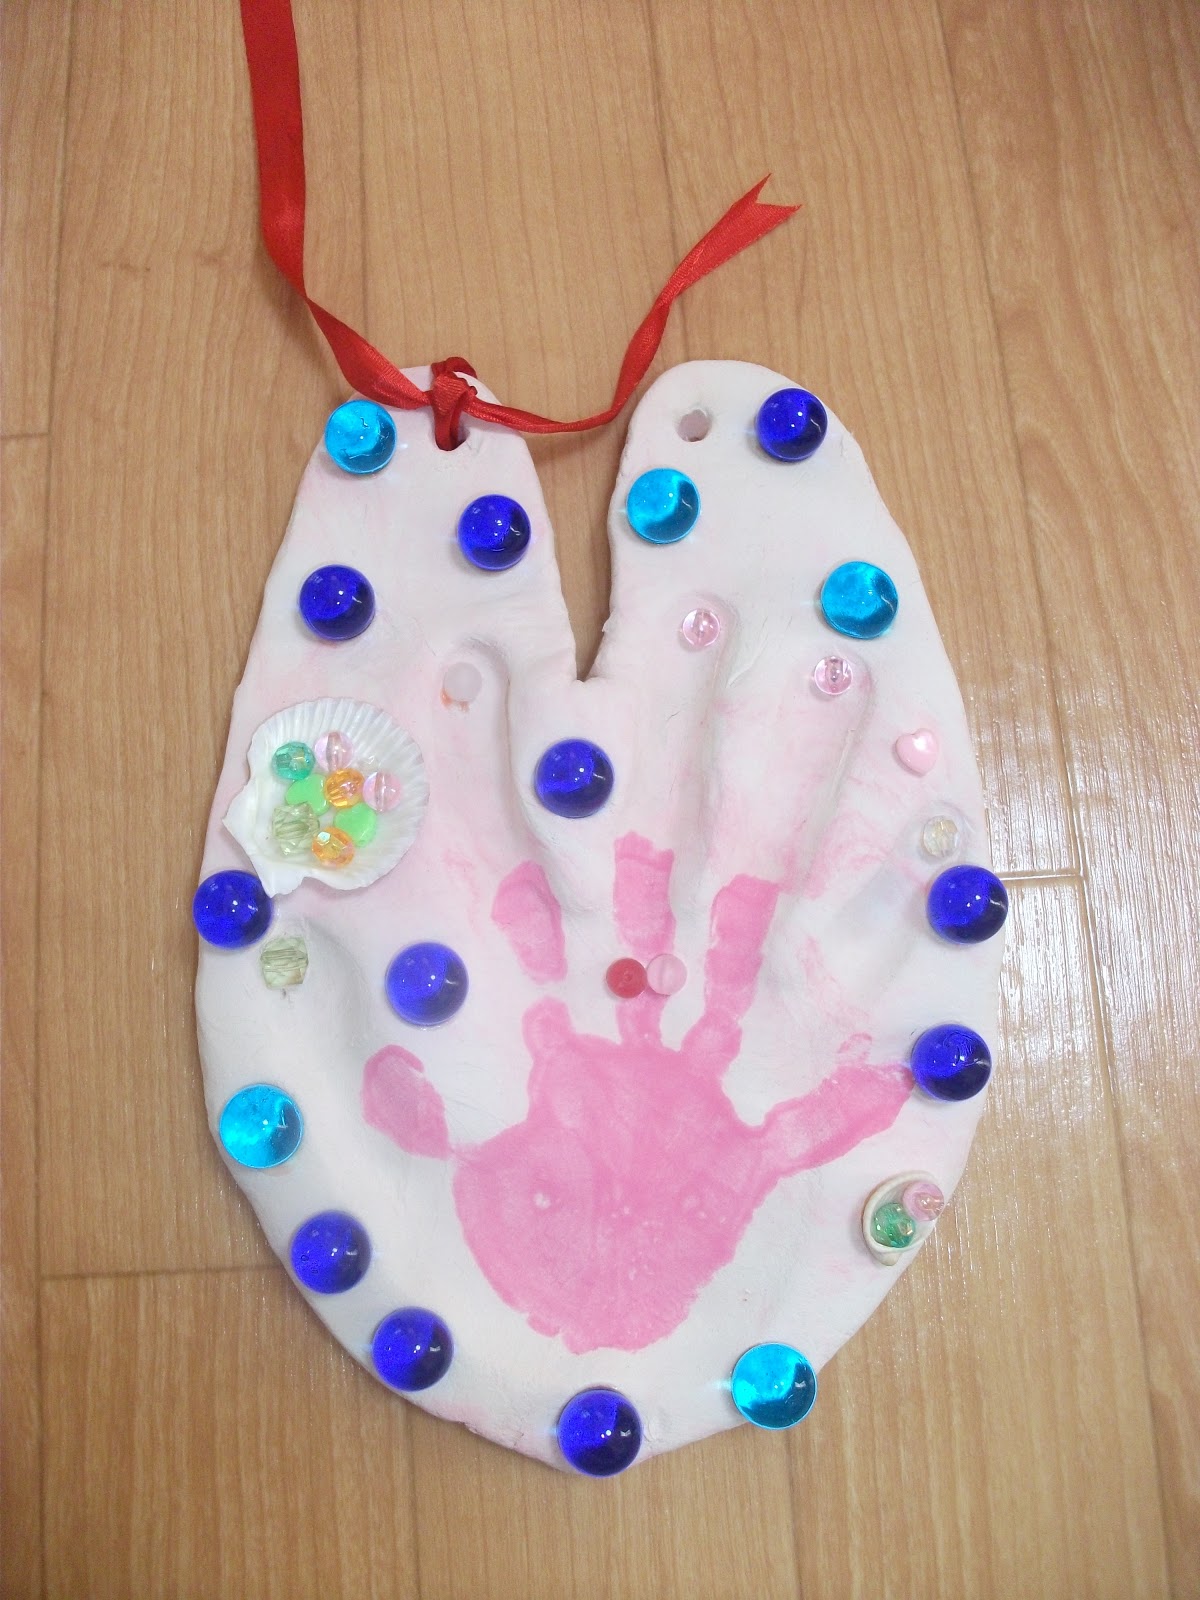 Mother and Baby Hand Print Clay Craft | Preschool ...